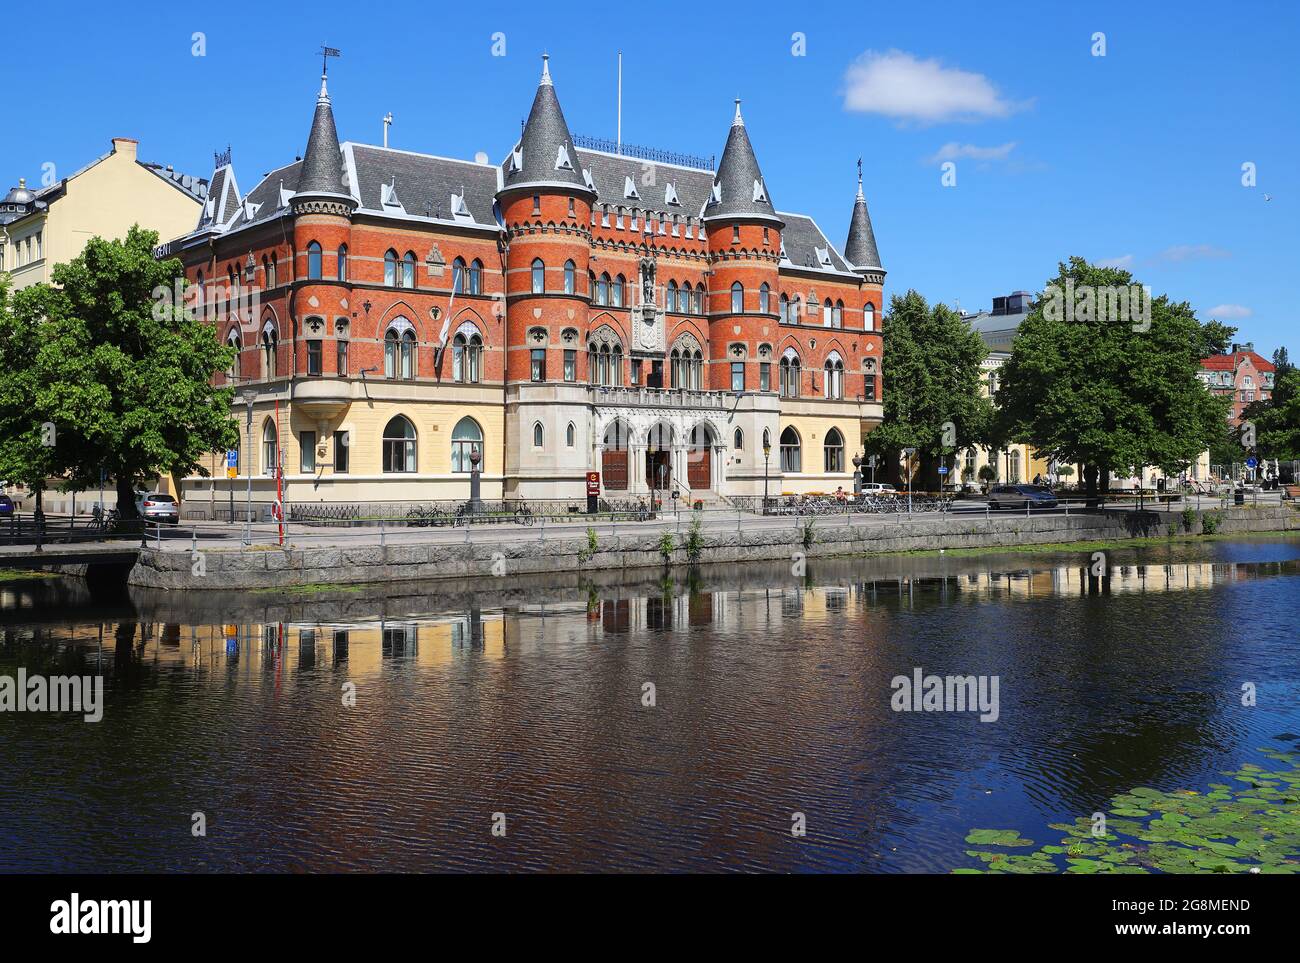 Orebro, Sweden - July 19, 2021: Exterior view of the Clarion Collection Hotel Borgen located at the riverside. Stock Photo